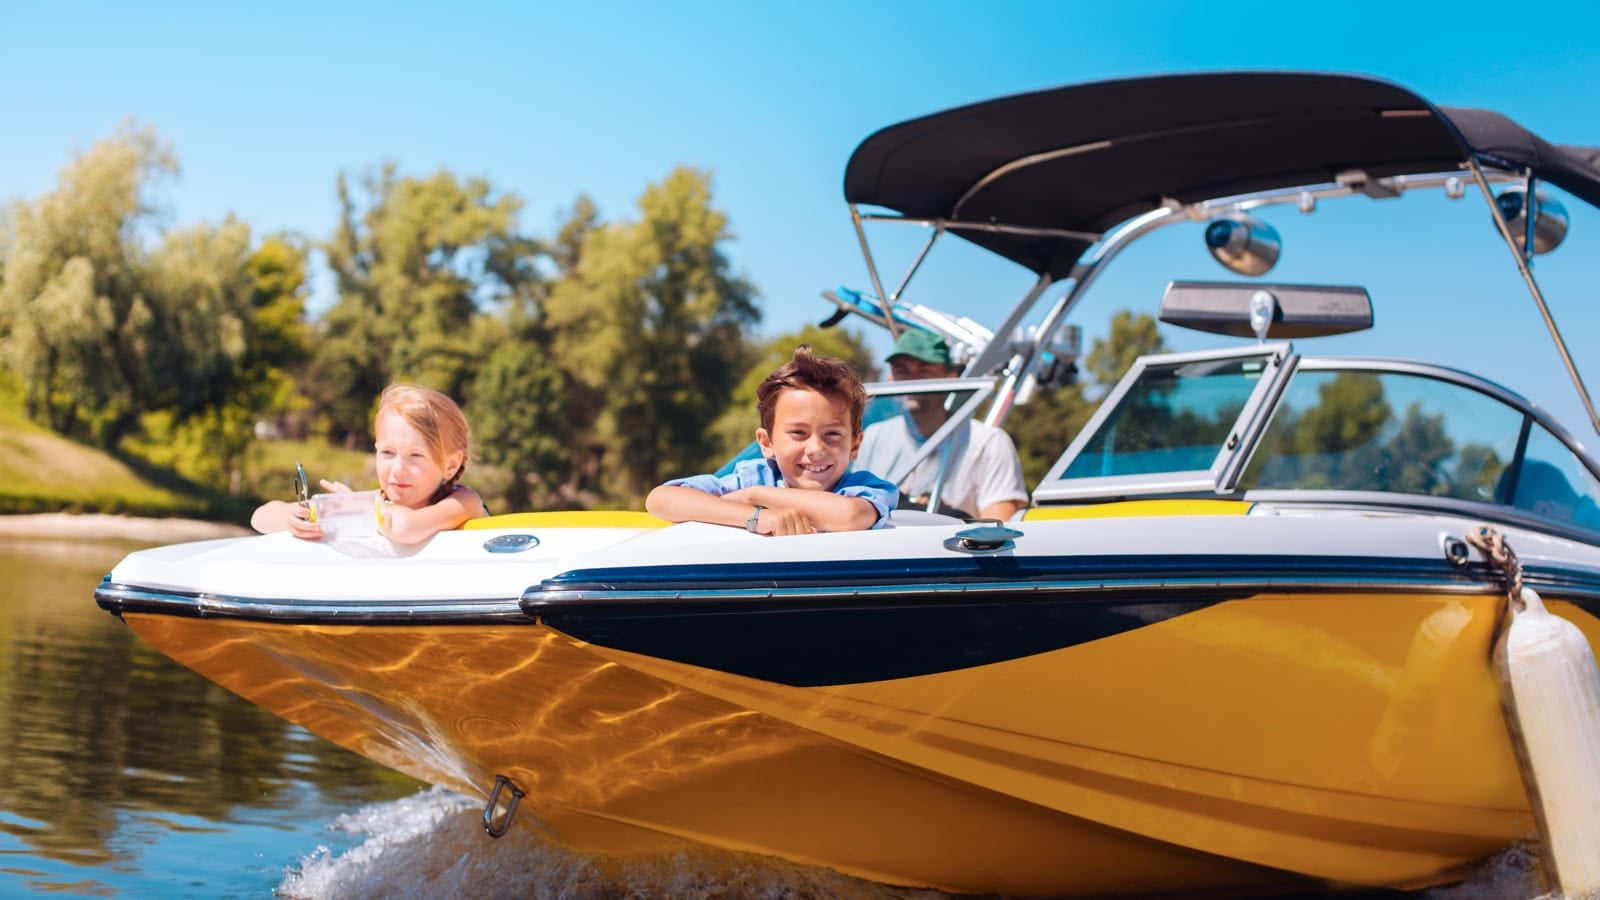 Kids riding in a boat